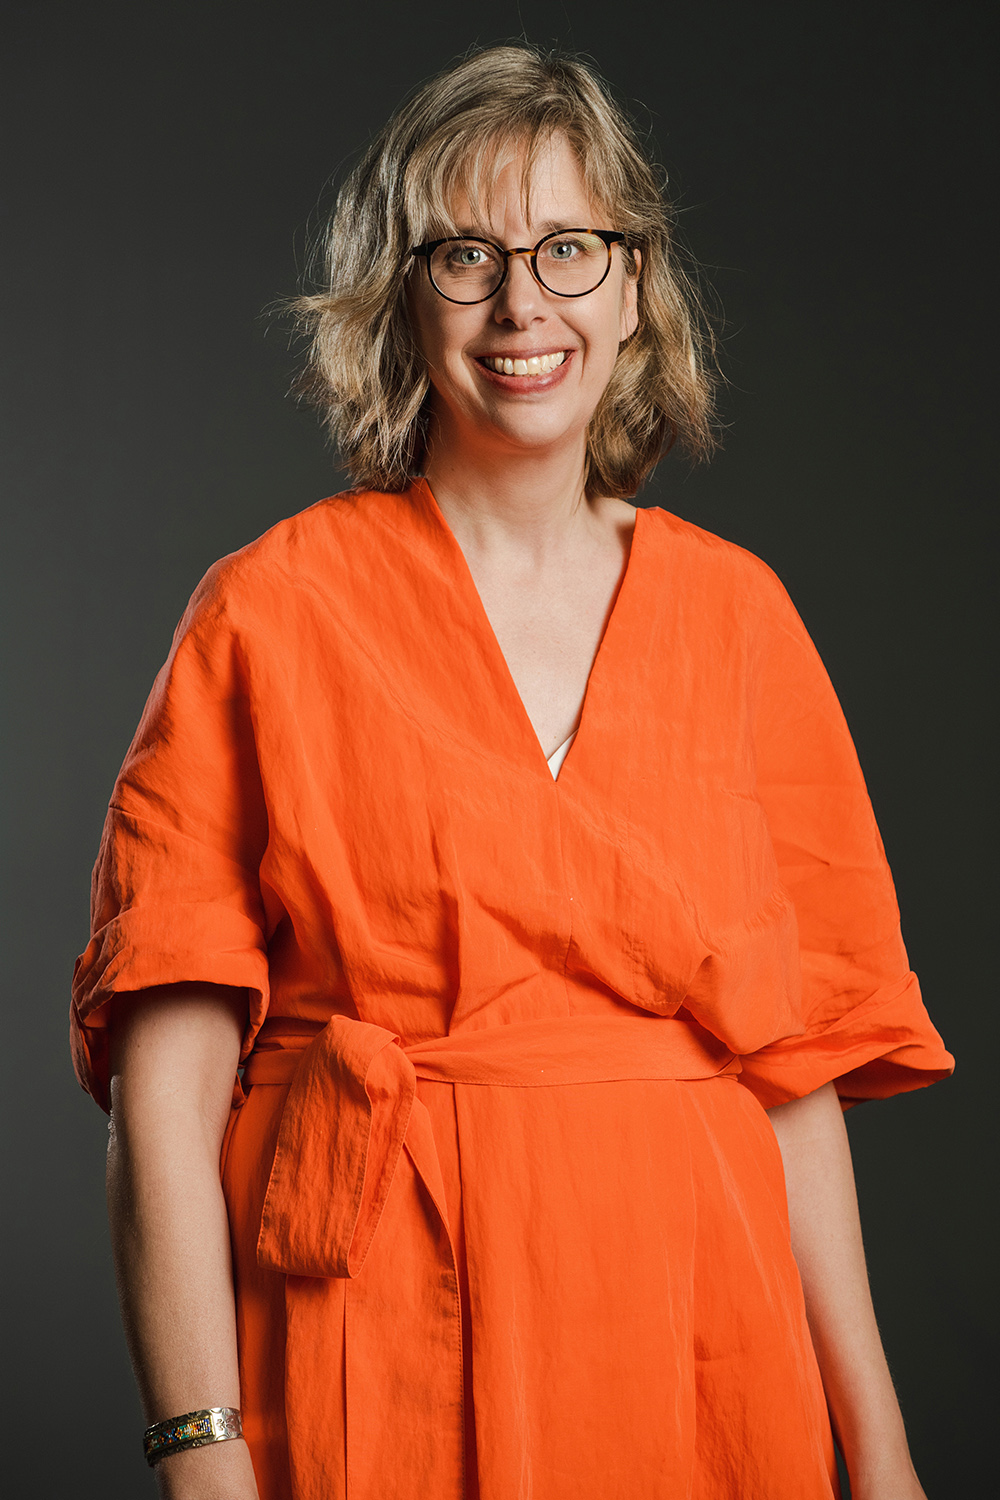 Color photograph of a light skinned woman with wavy blond hair wearing glasses and an orange jumpsuit